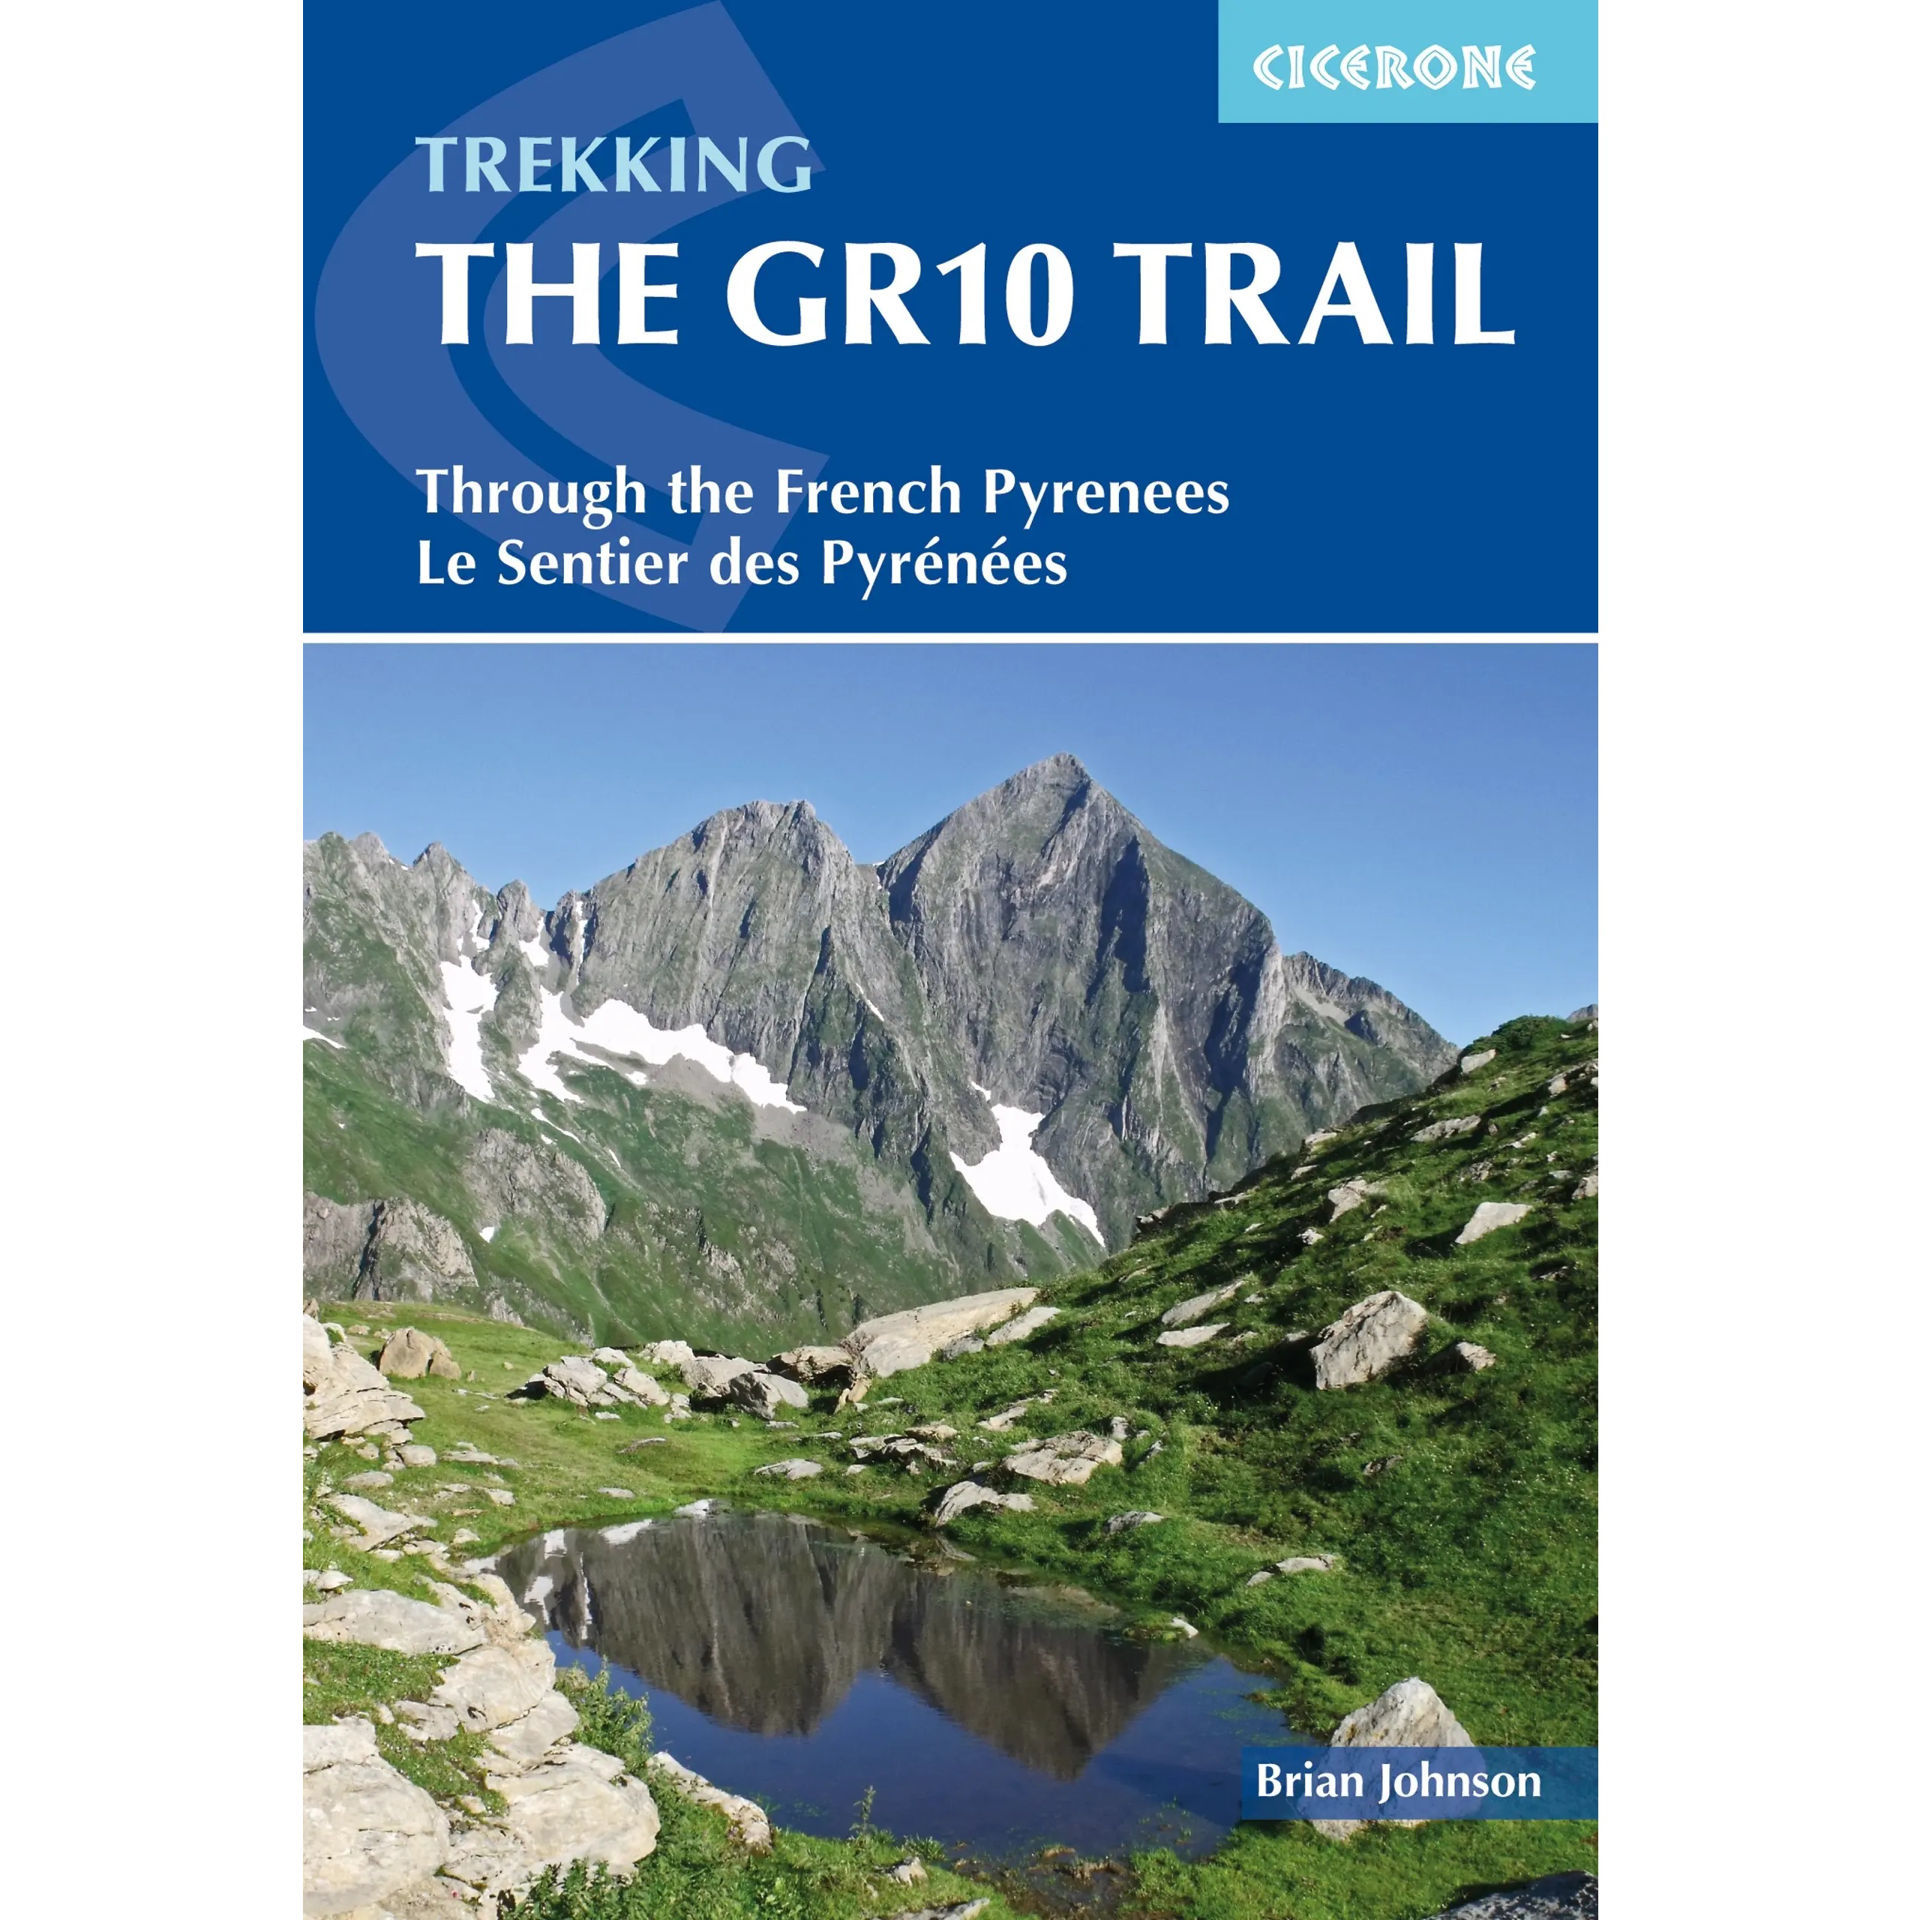 Cicerone Trekking The GR10 Trail: Through the French Pyrenees - Le Sentier des Pyrenees